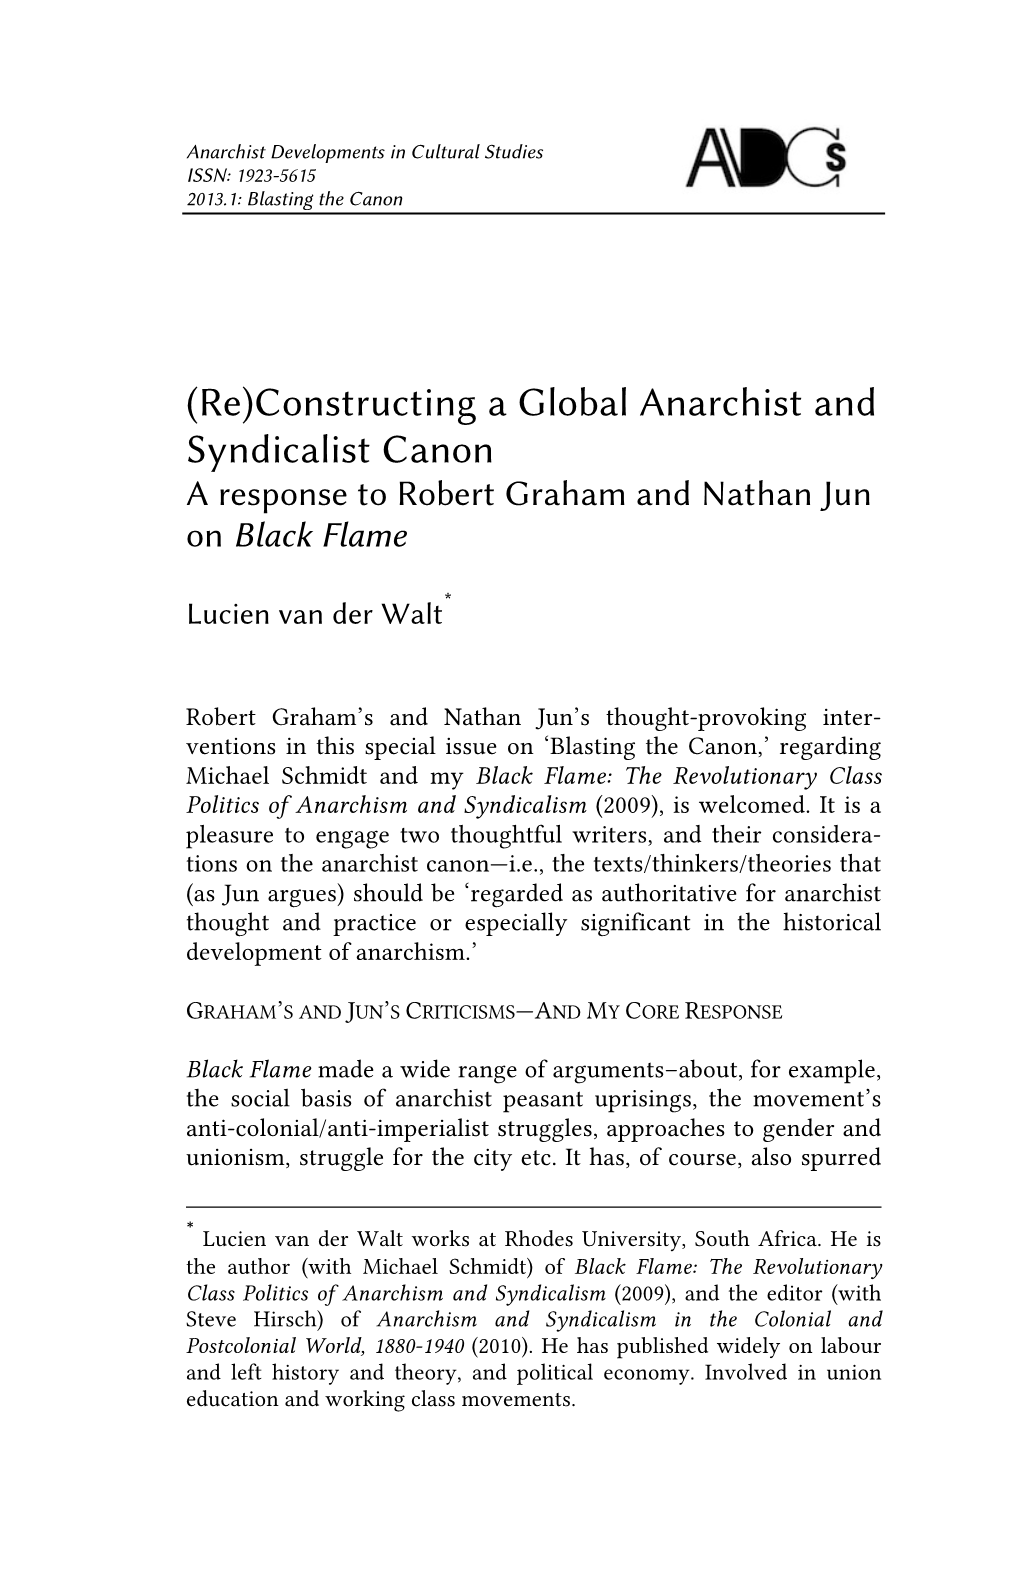 Constructing a Global Anarchist and Syndicalist Canon a Response to Robert Graham and Nathan Jun on Black Flame